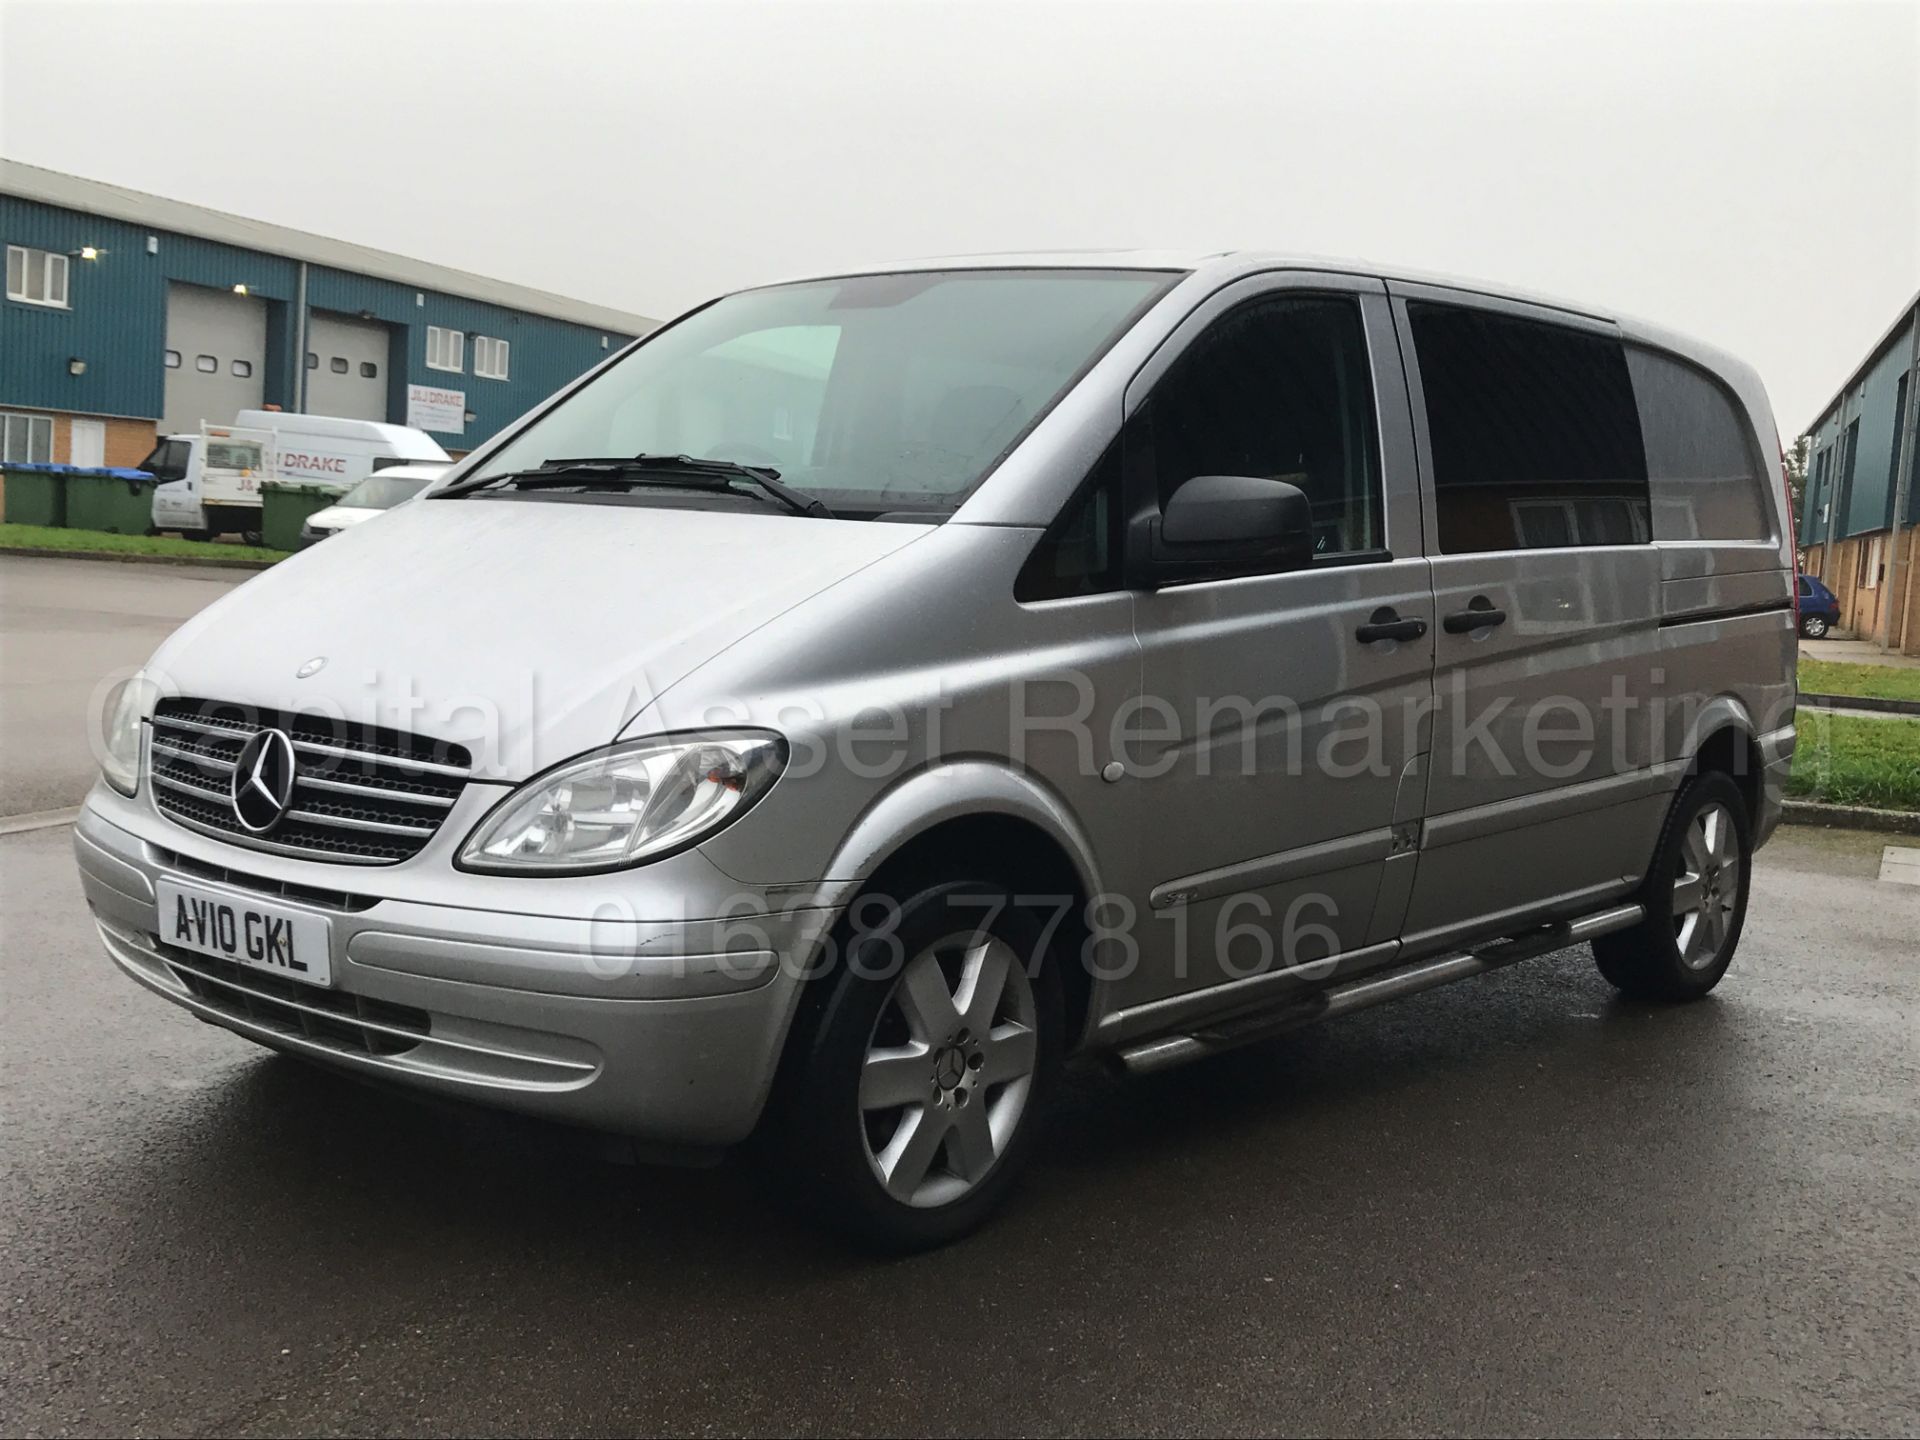 MERCEDES VITO *SPORT* '5 SEATER DUELINER' (2010 - 10 REG) '2.1 CDI - 150 BHP - 6 SPEED' **AIR CON** - Image 5 of 35